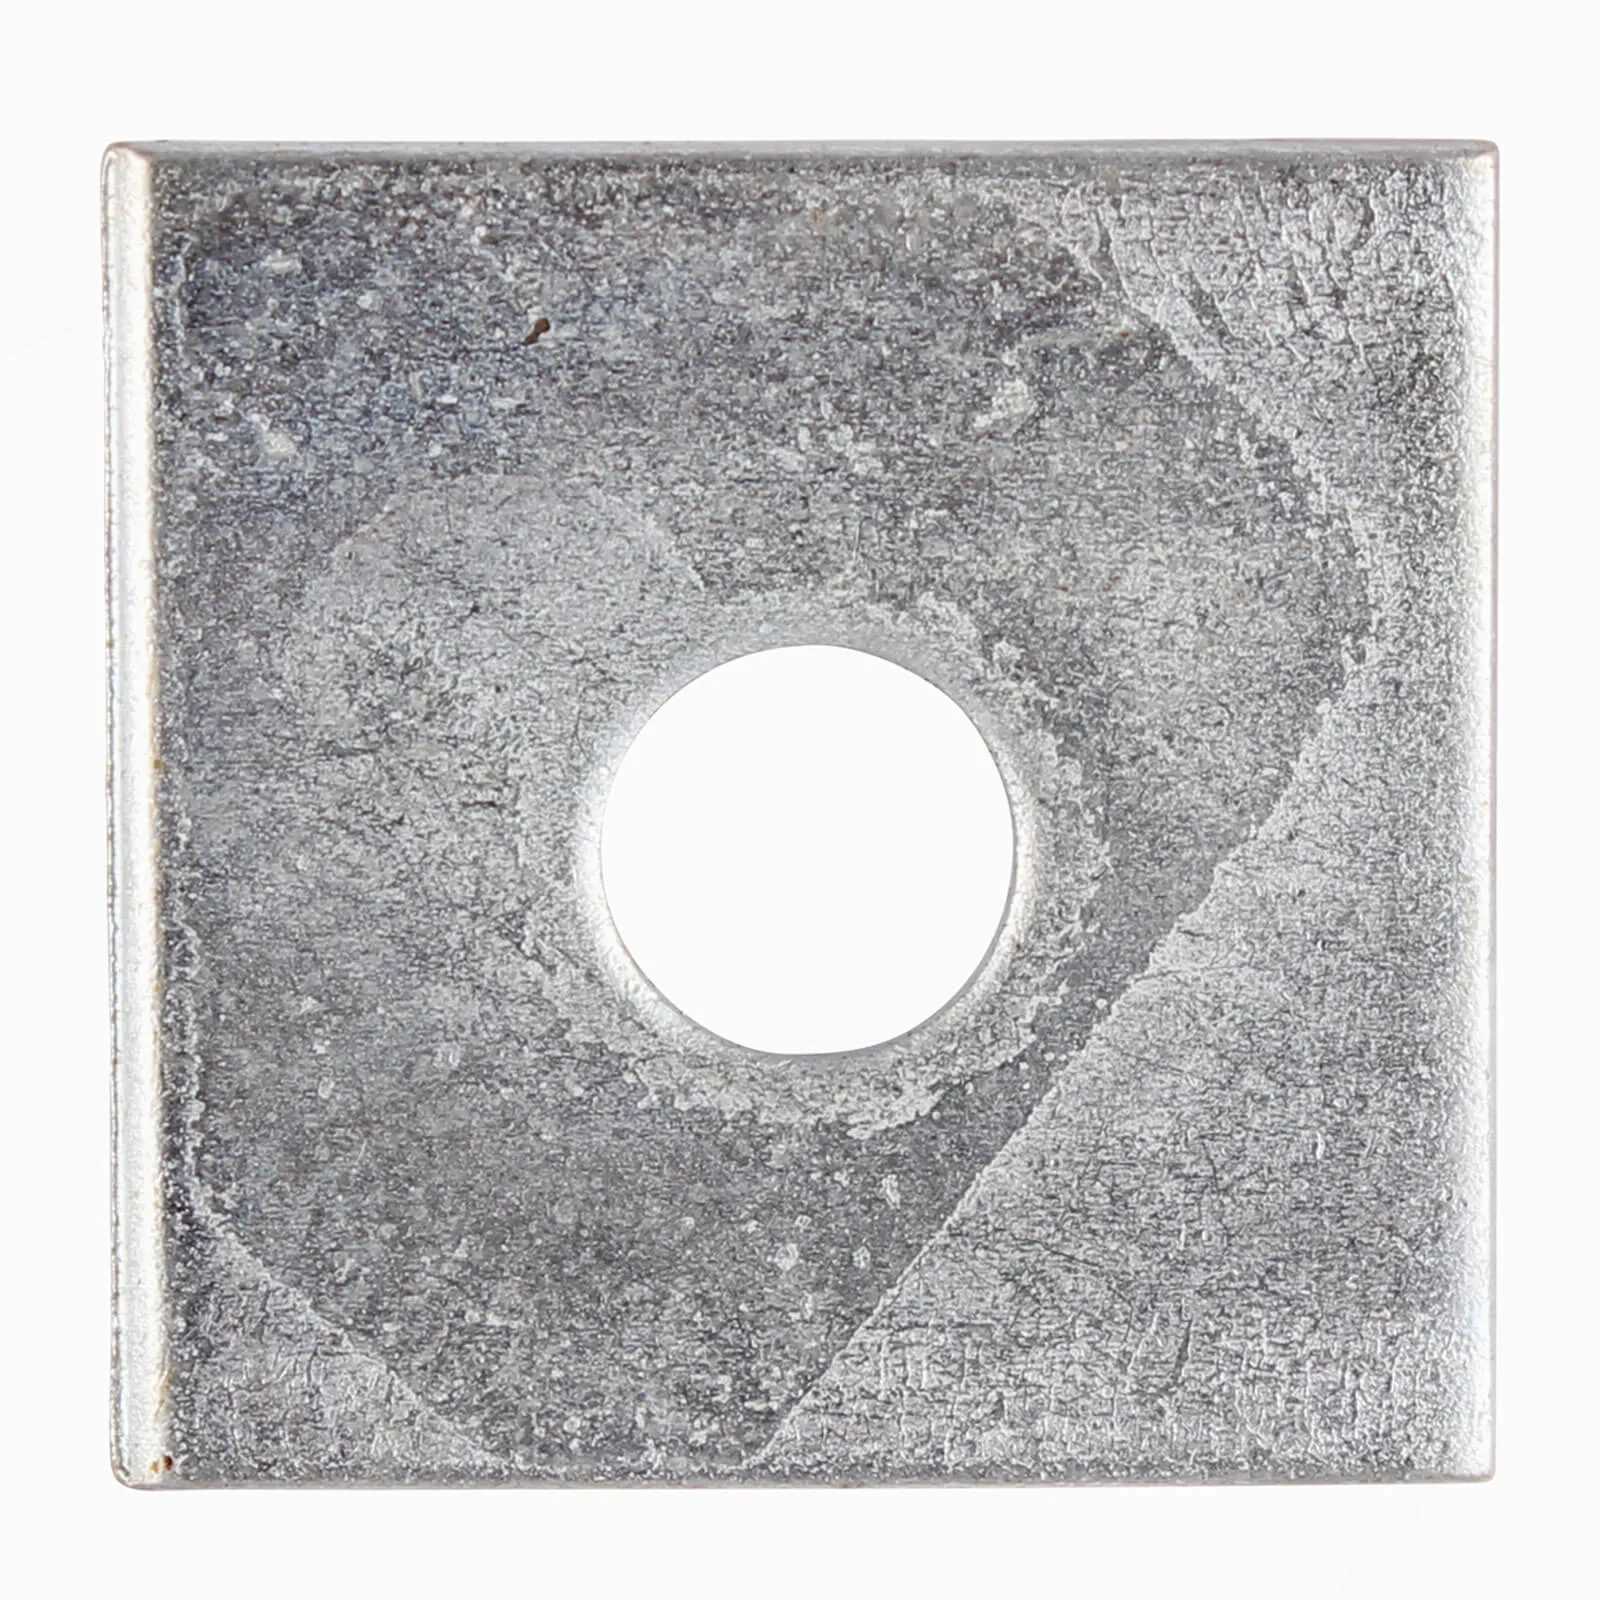 Square Plate Washer Zinc Plated - 12mm, 50mm, Pack of 30